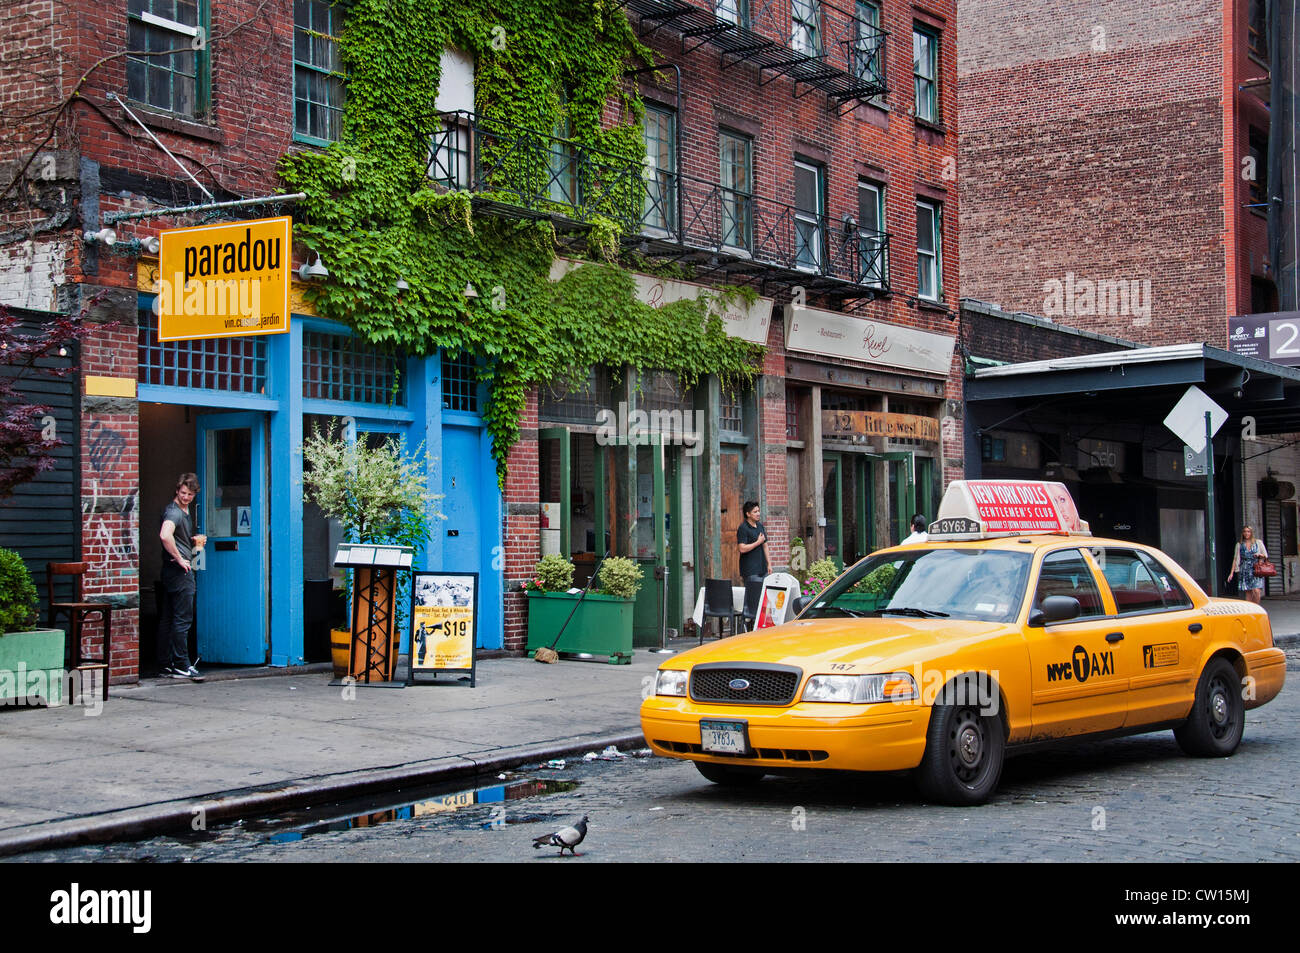 Parado Meatpacking District Manhattan New York United States of America Banque D'Images